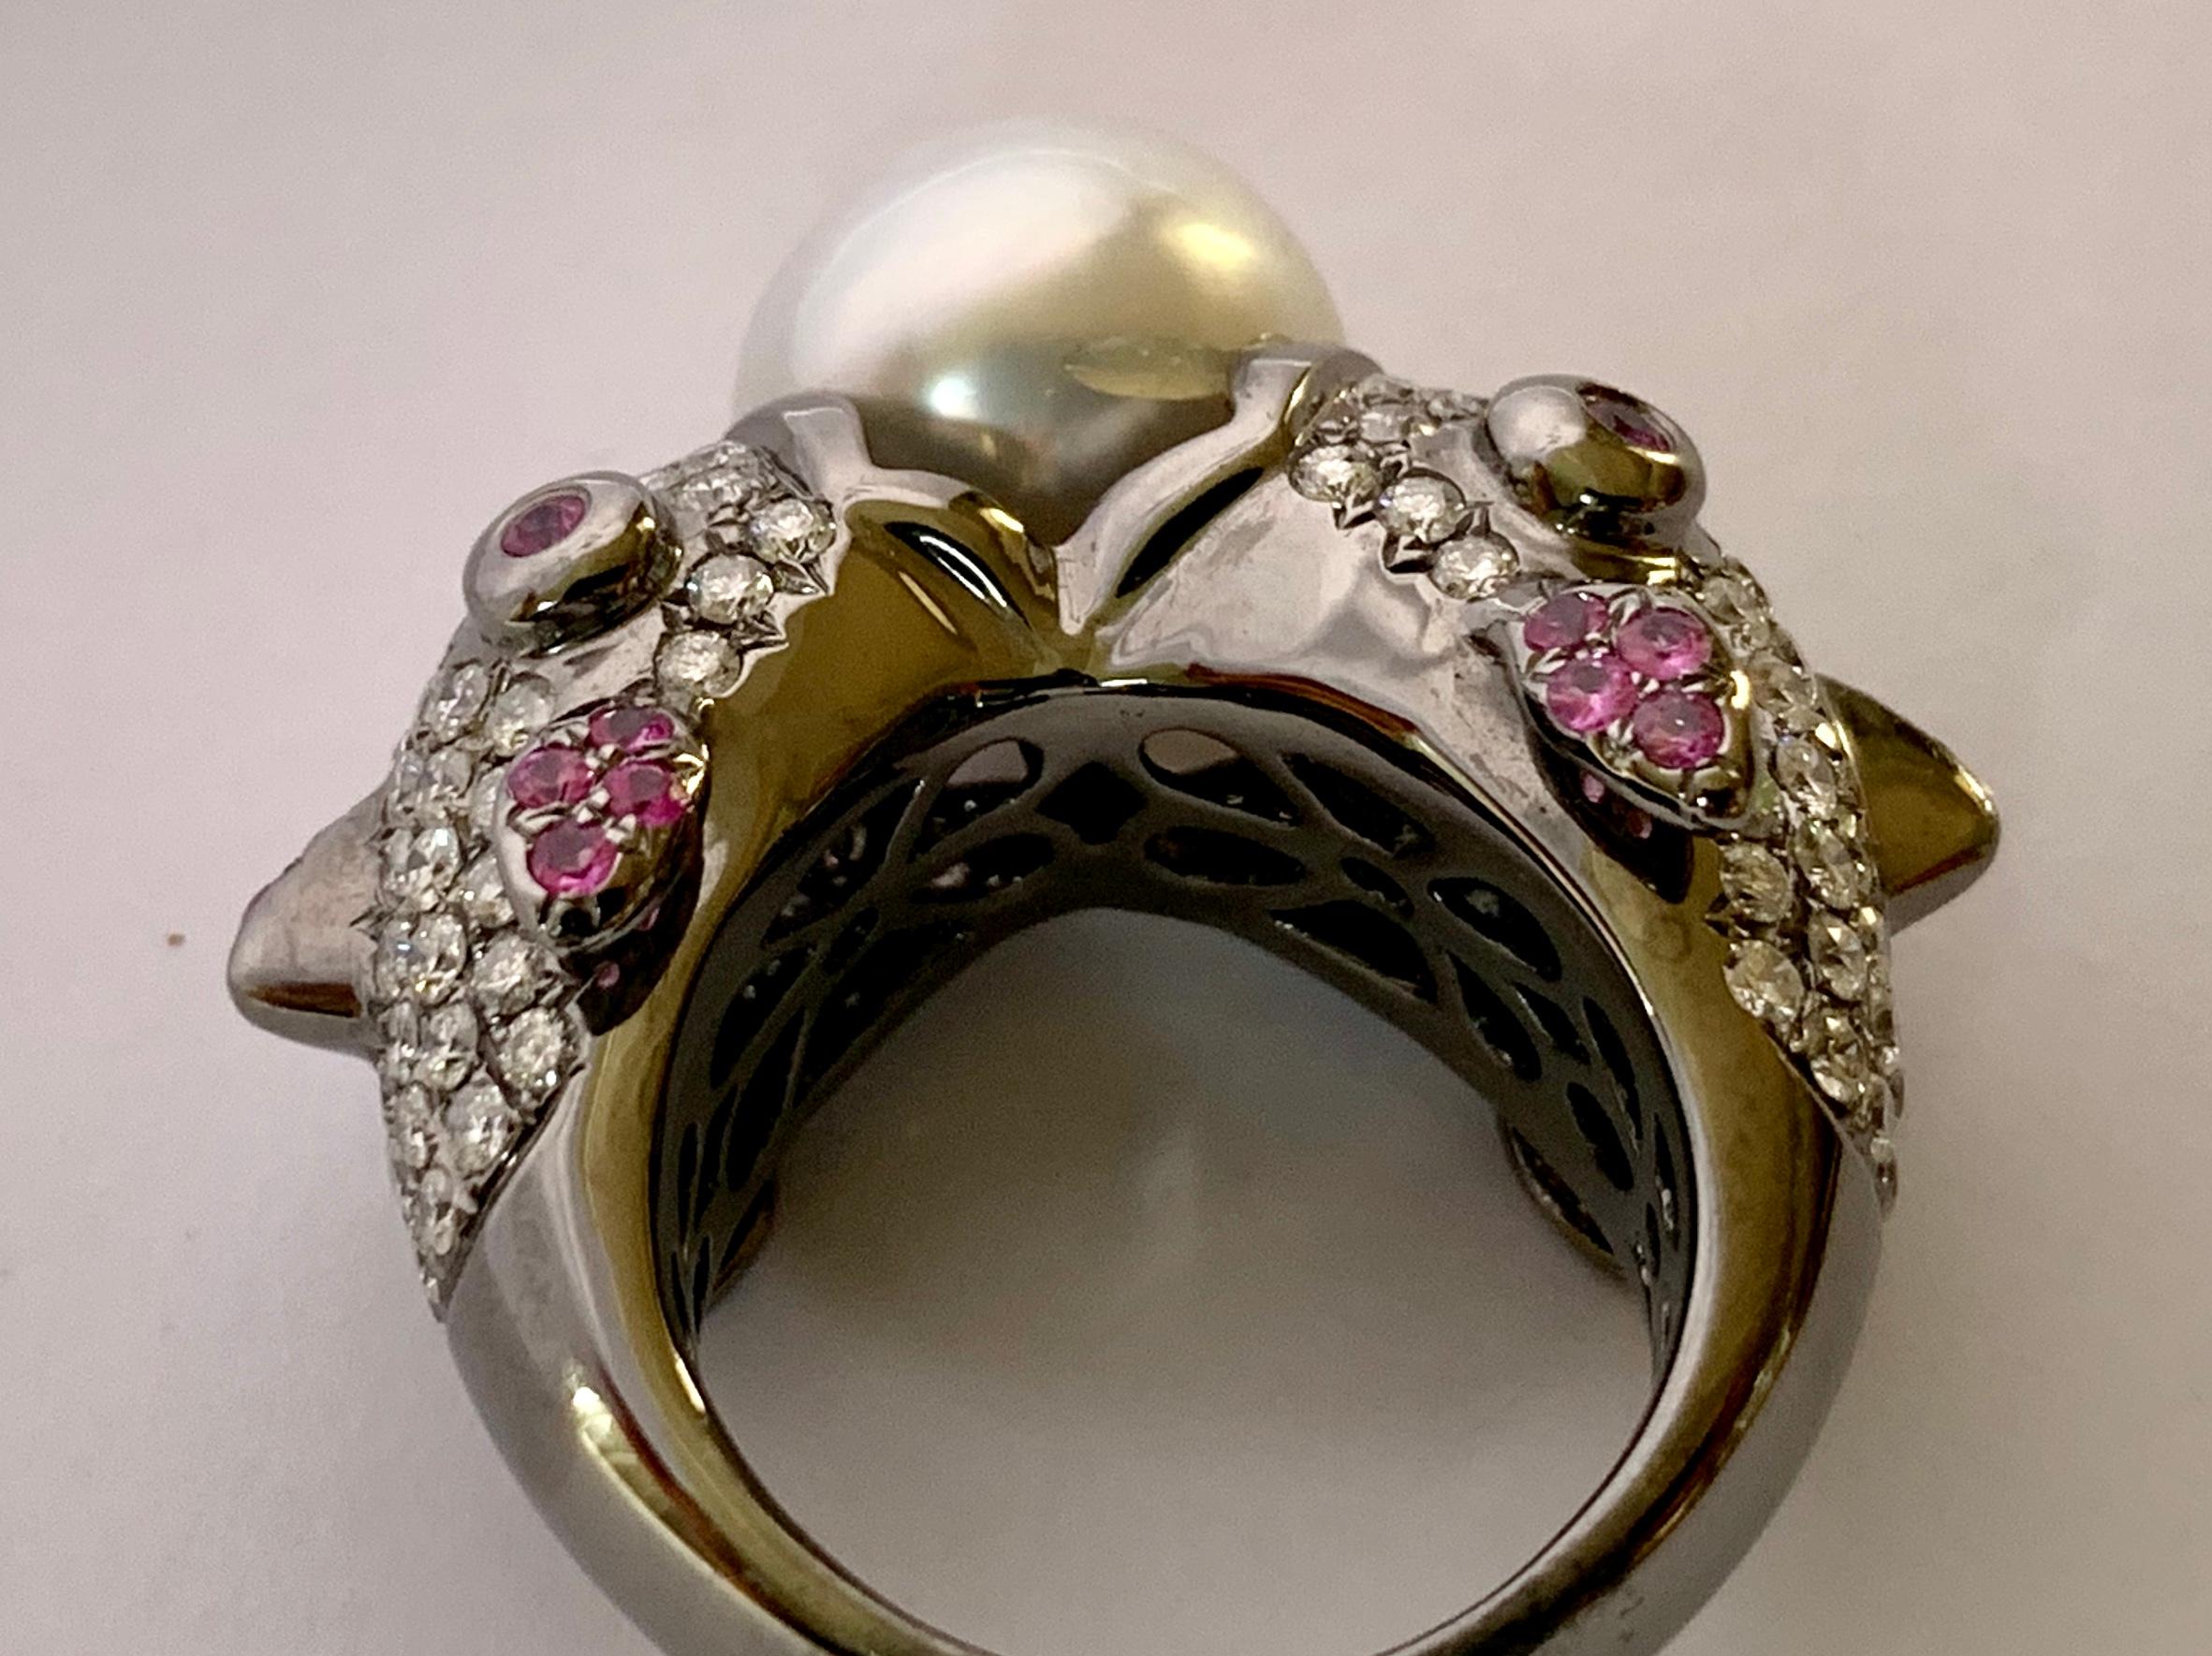 This unique Ring features one white South Sea Pearl (13,8mm) wich is held by 2 Fishes from each sides. Pave set with 138 brilliant cut Diamonds of 2.94 ct and 24 pink Sapphires weighing 0.59 ct. In 18 K white Gold with black Rhodium. 
The ring is